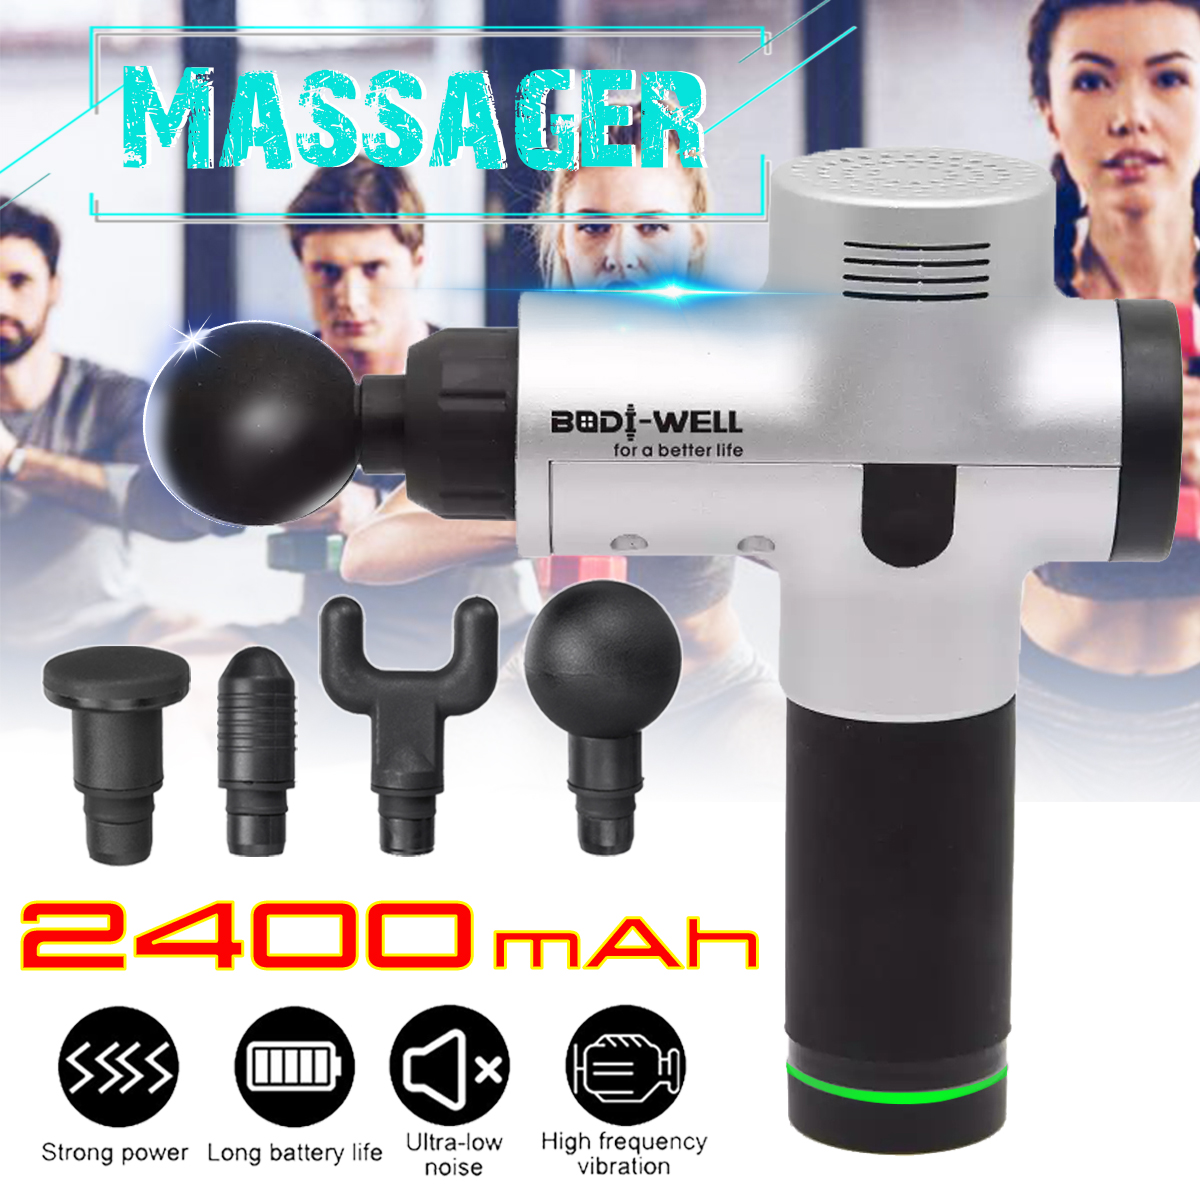 2400-mAh-Percussion-Massage-Deep-Tissue-Electric-Massager-Cordless-Massag-Device-for-Body-Pain-Relie-1536268-1